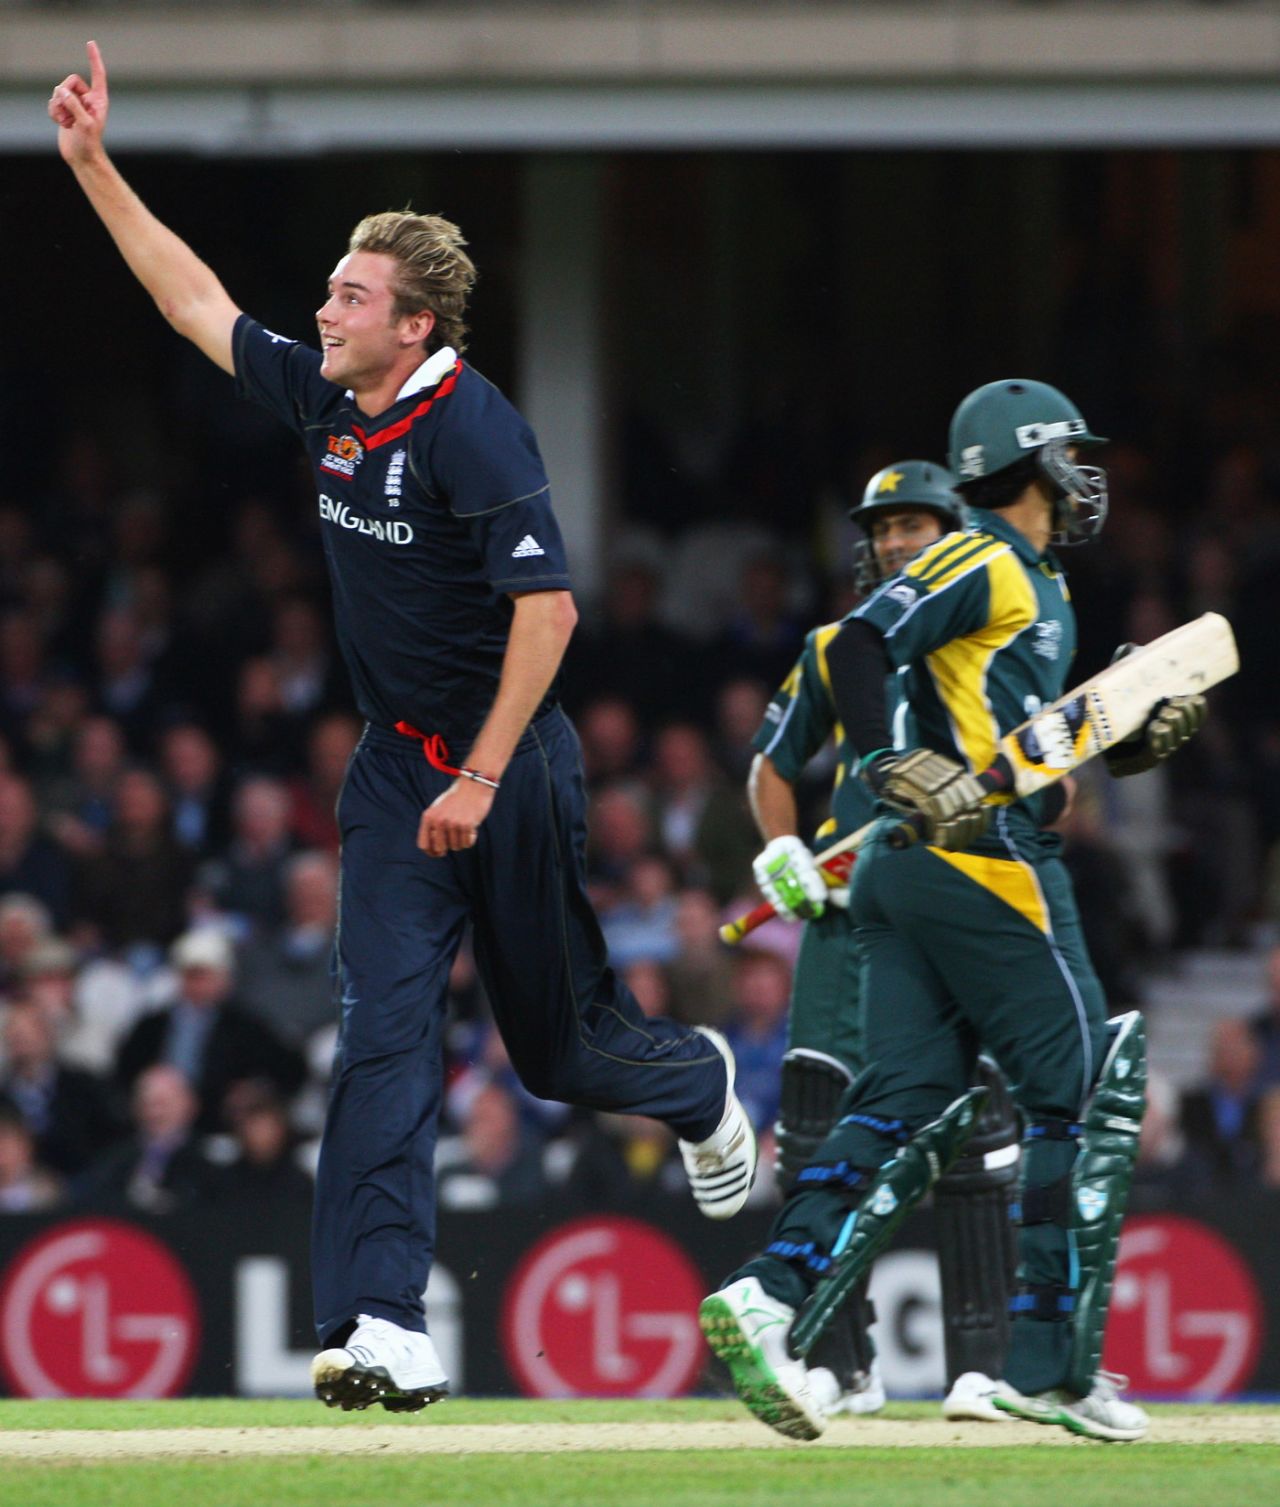 Stuart Broad took two wickets in an over to set England on the road to victory, England v Pakistan, ICC World Twenty20, The Oval, June 7, 2009